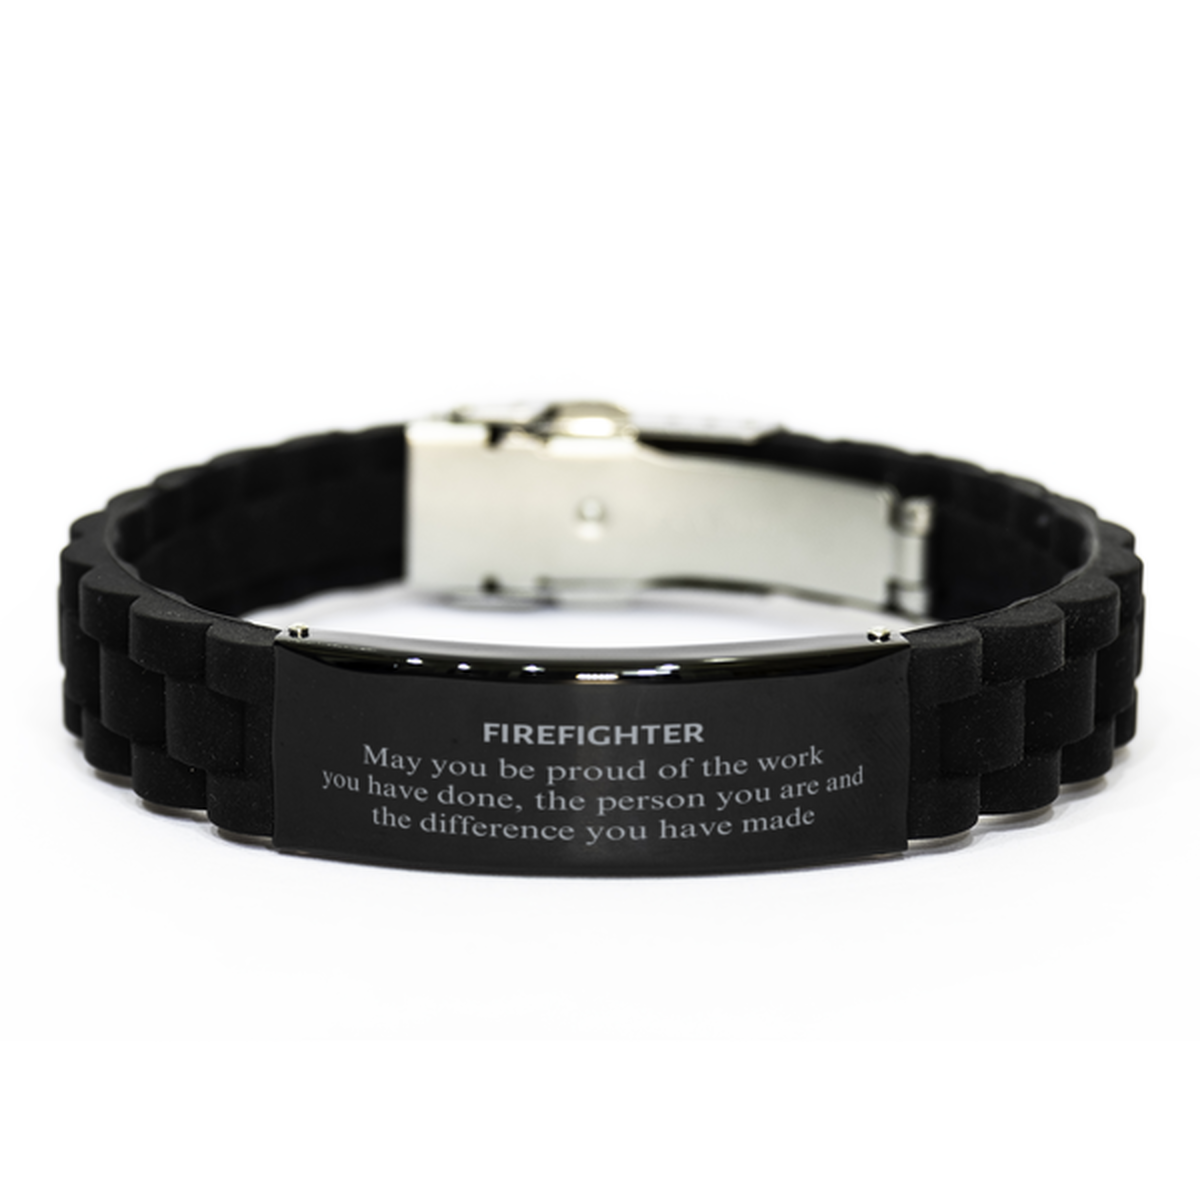 Firefighter May you be proud of the work you have done, Retirement Firefighter Black Glidelock Clasp Bracelet for Colleague Appreciation Gifts Amazing for Firefighter